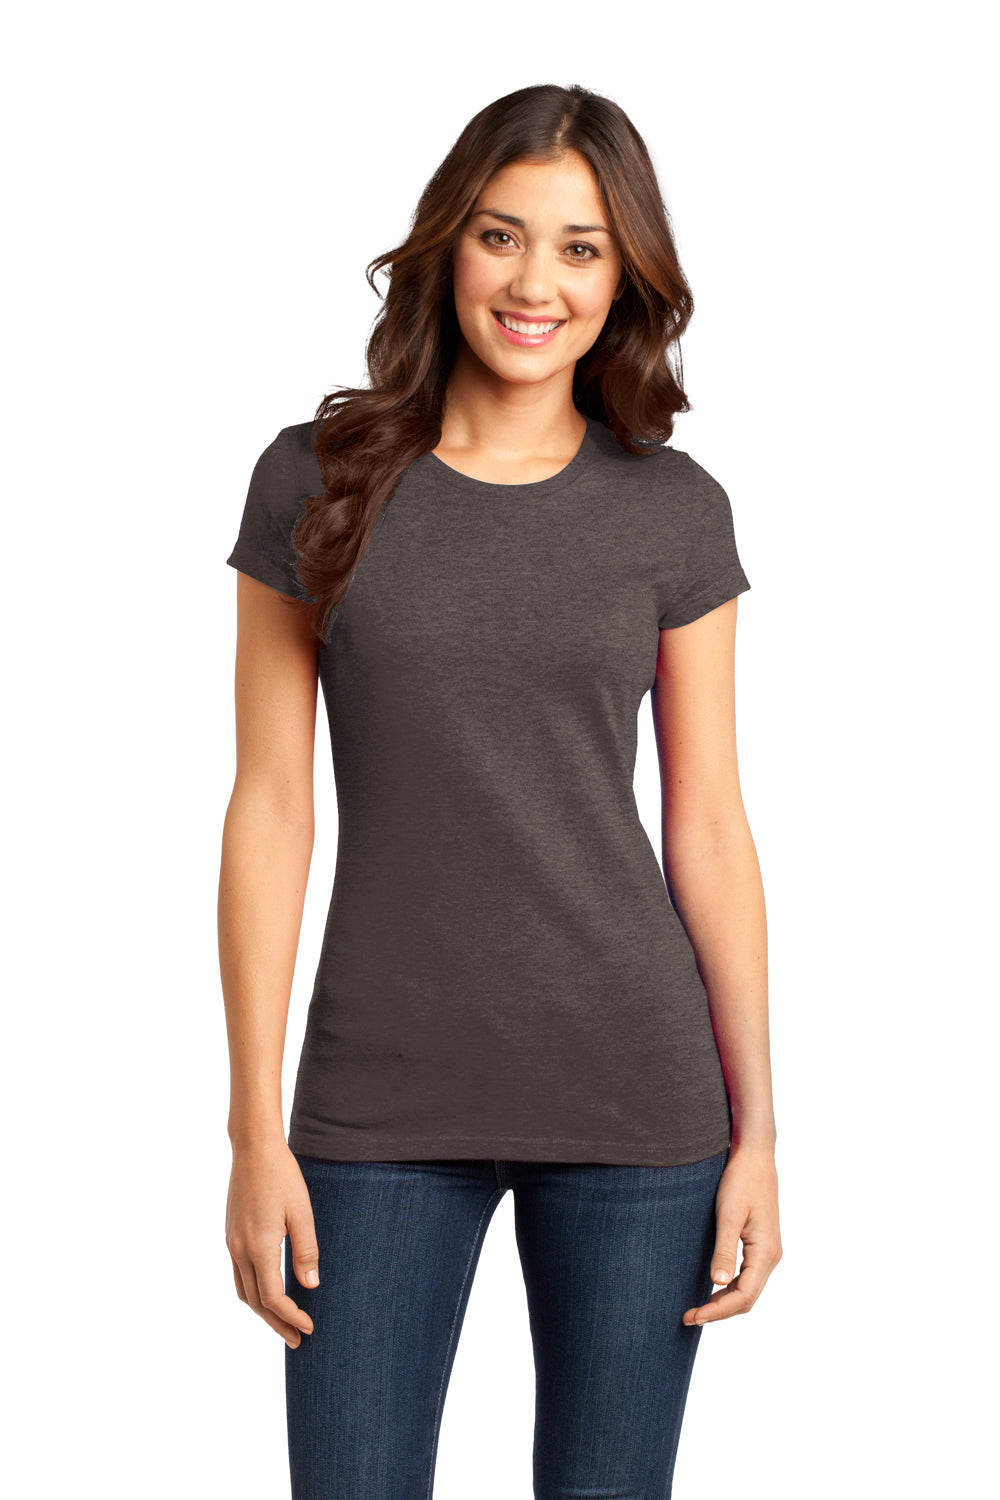 District DT6001 Womens Very Important Short Sleeve Crewneck T-Shirt Heather Brown Front